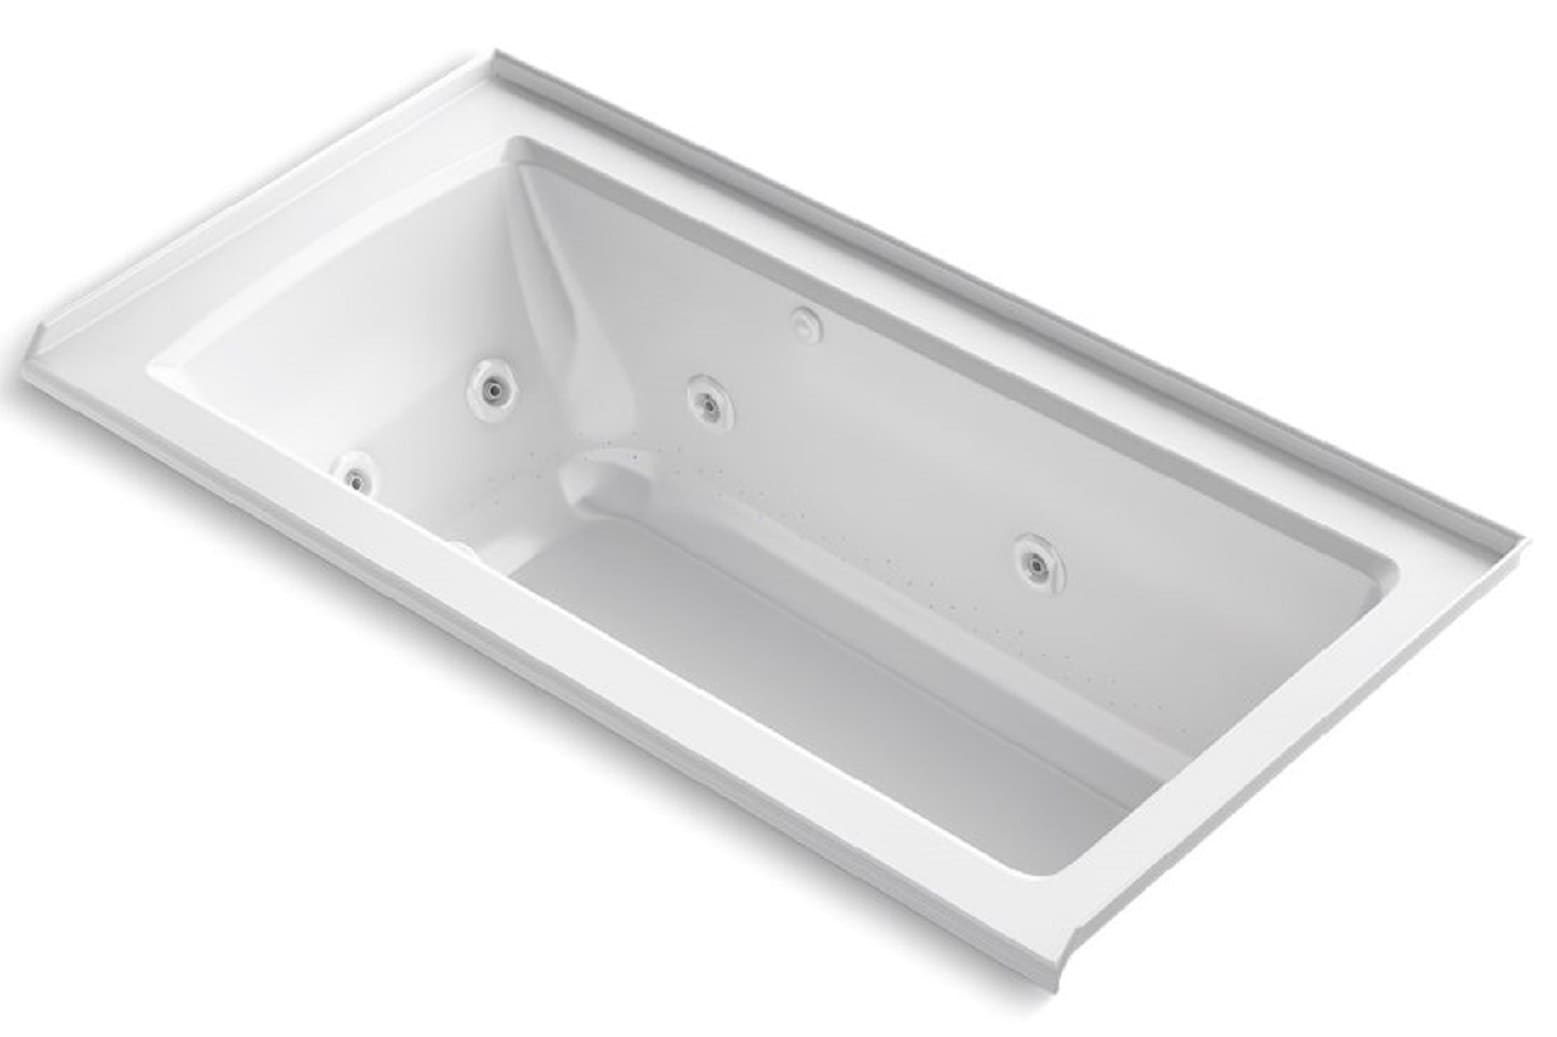 Archer Collection K-1947-XHGHR-0 60"" x 30"" x 20"" Alcove Heated BubbleMassage Airbath Whirlpool Combo Bath Tub with 118 Airjets  8 Hydromassage Jets -  Kohler